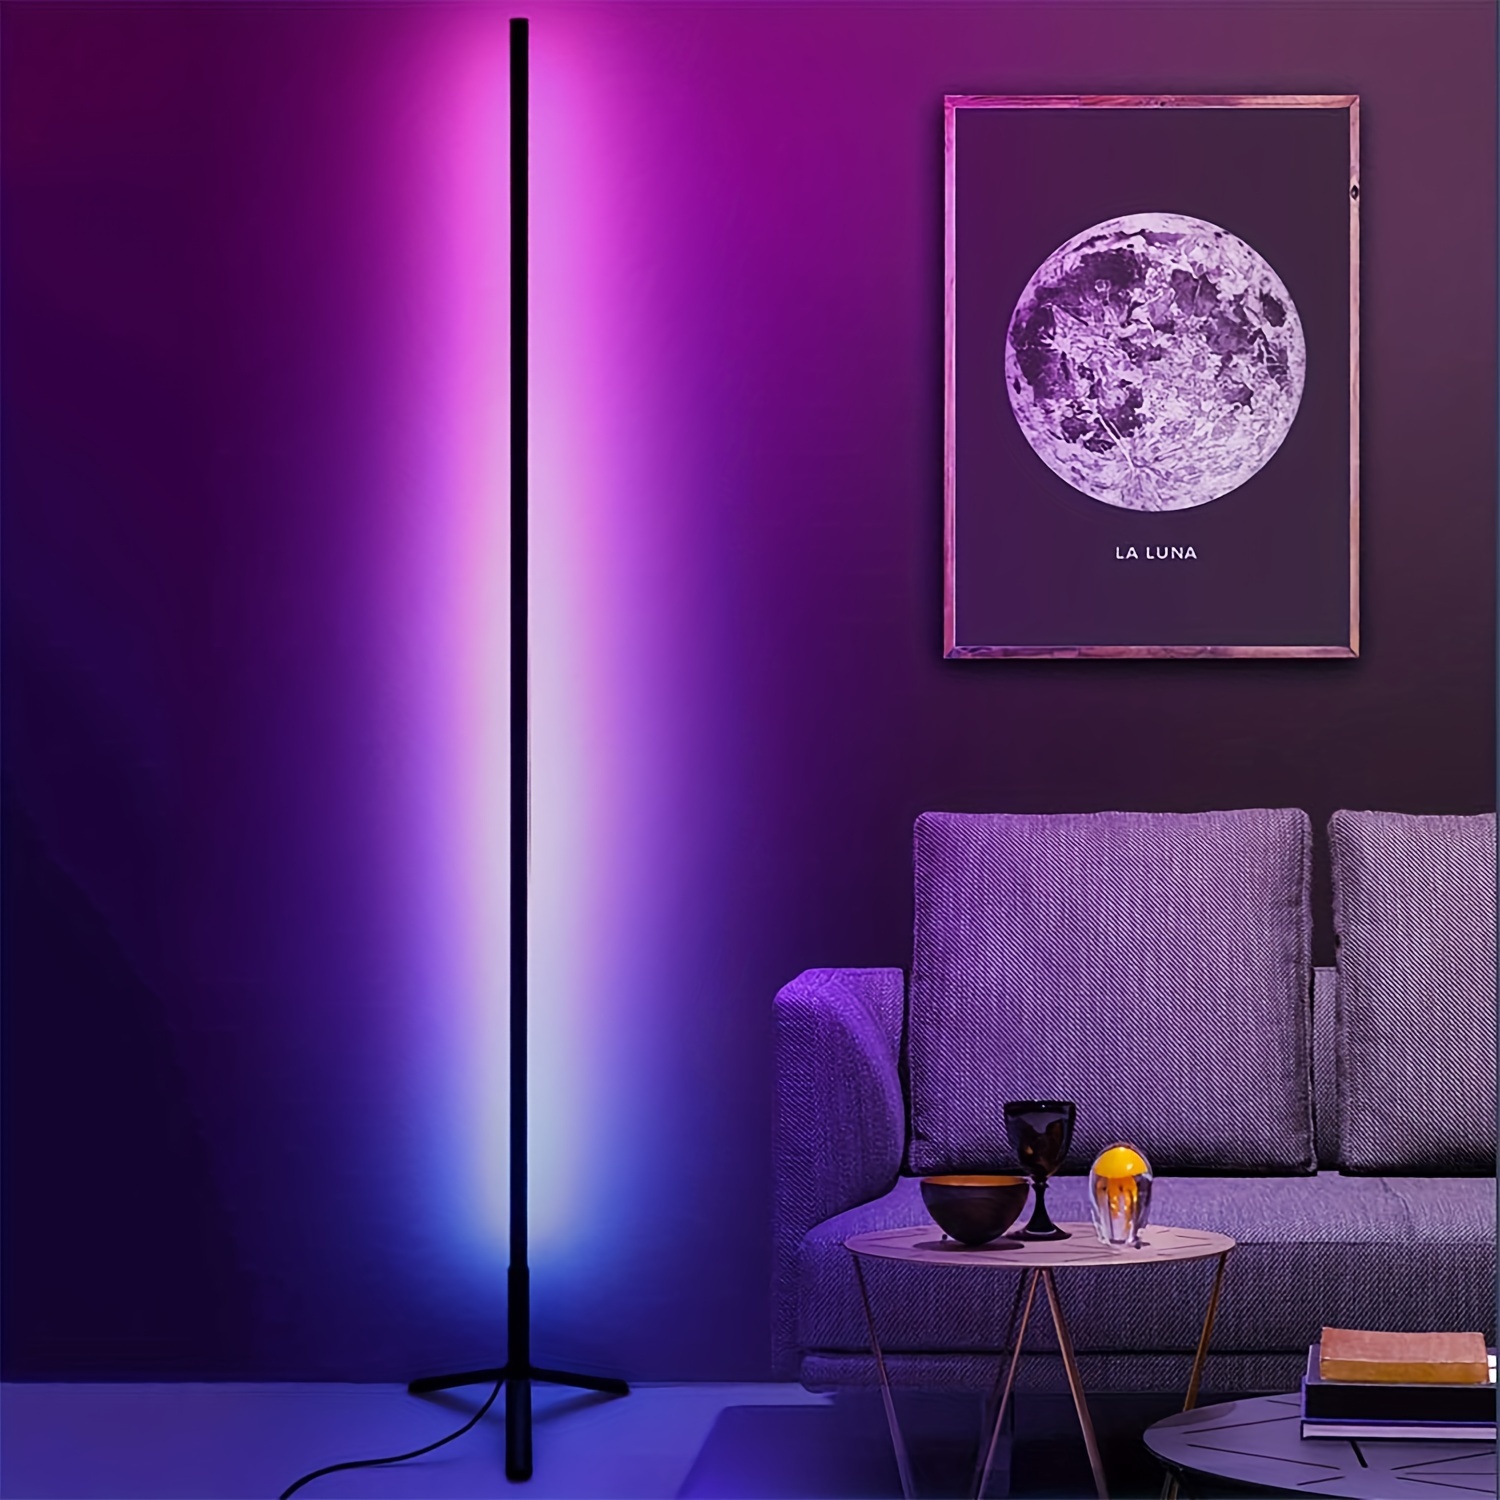 TACAHE Minimalist Corner Floor Lamp - 2700K-6500K Dimmable LED Night Light  - Modern Standing Mood Lamp with Remote Control for Living Room, Bedroom 